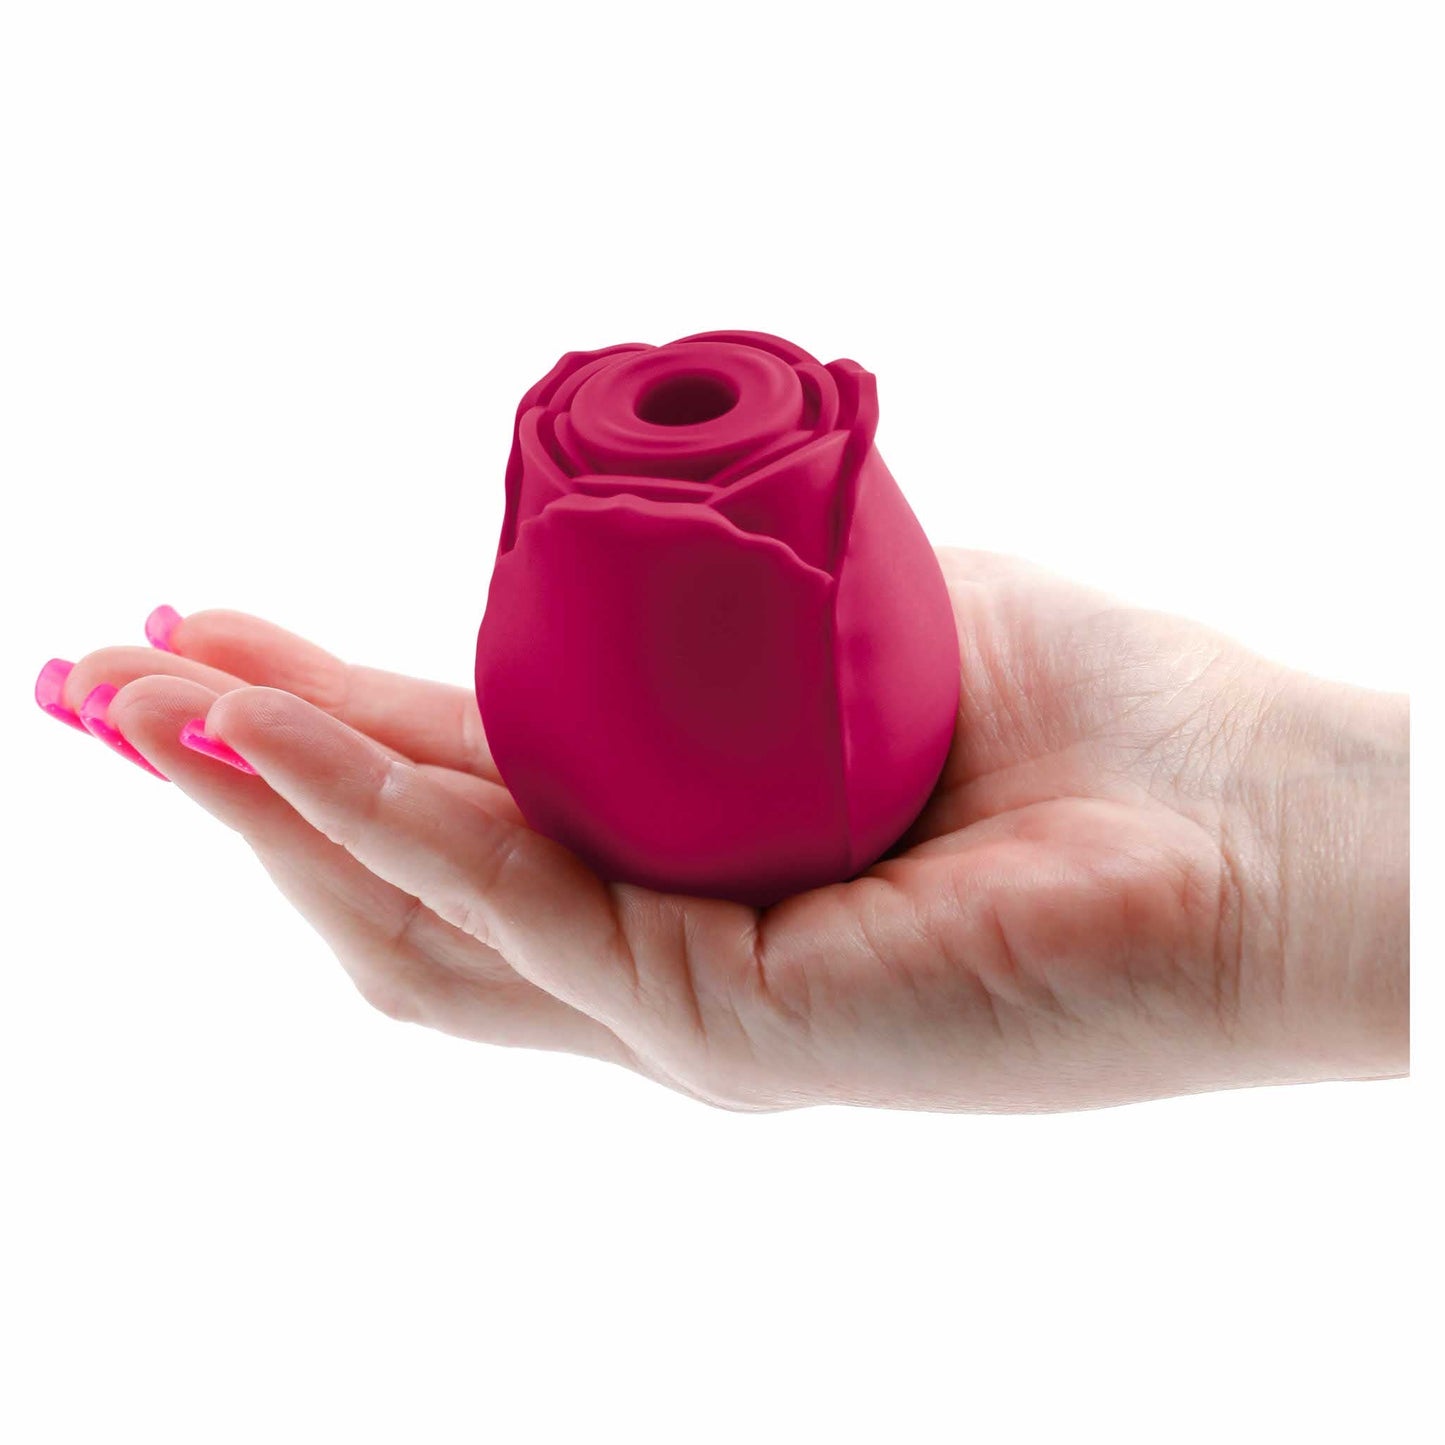 person holding the ns novelties inya the rose vibrating air pulsator